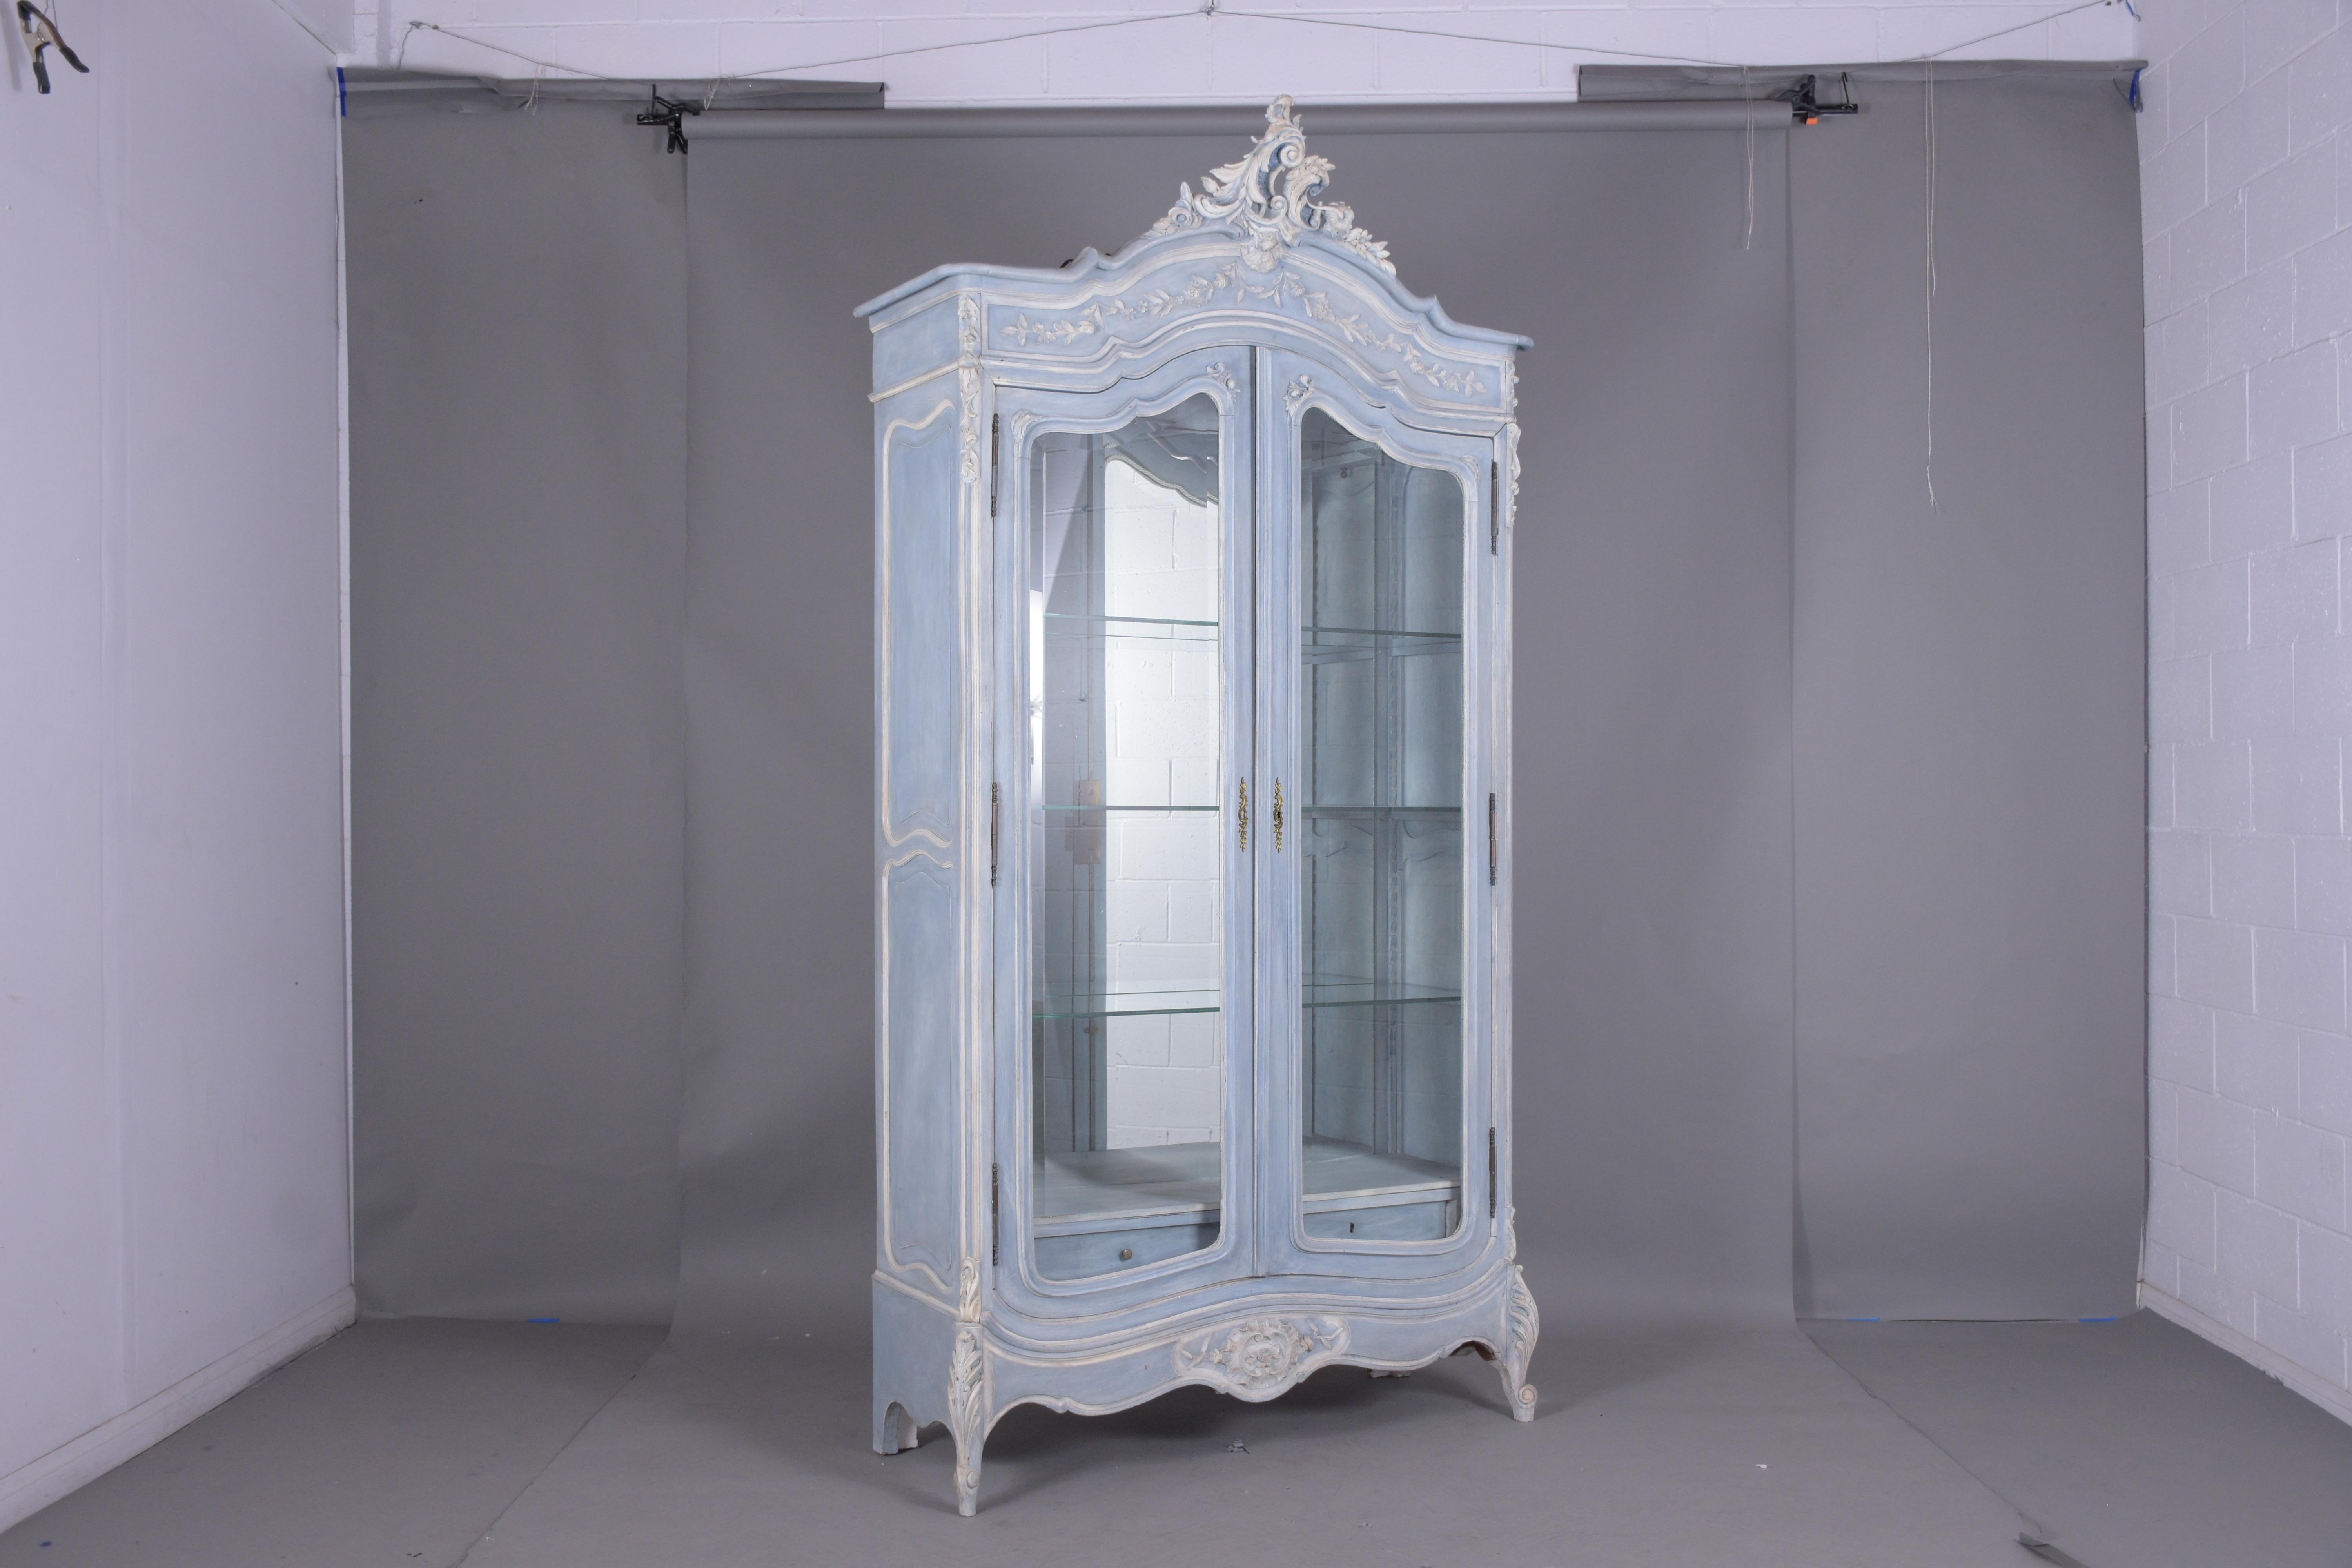 A unique antique French Louis XV display cabinet crafted out of walnut wood with remarkable hand-carved details throughout the entire piece. The bookcase is newly painted in a pale blue and off-white color and features a mirror on the back/bottom